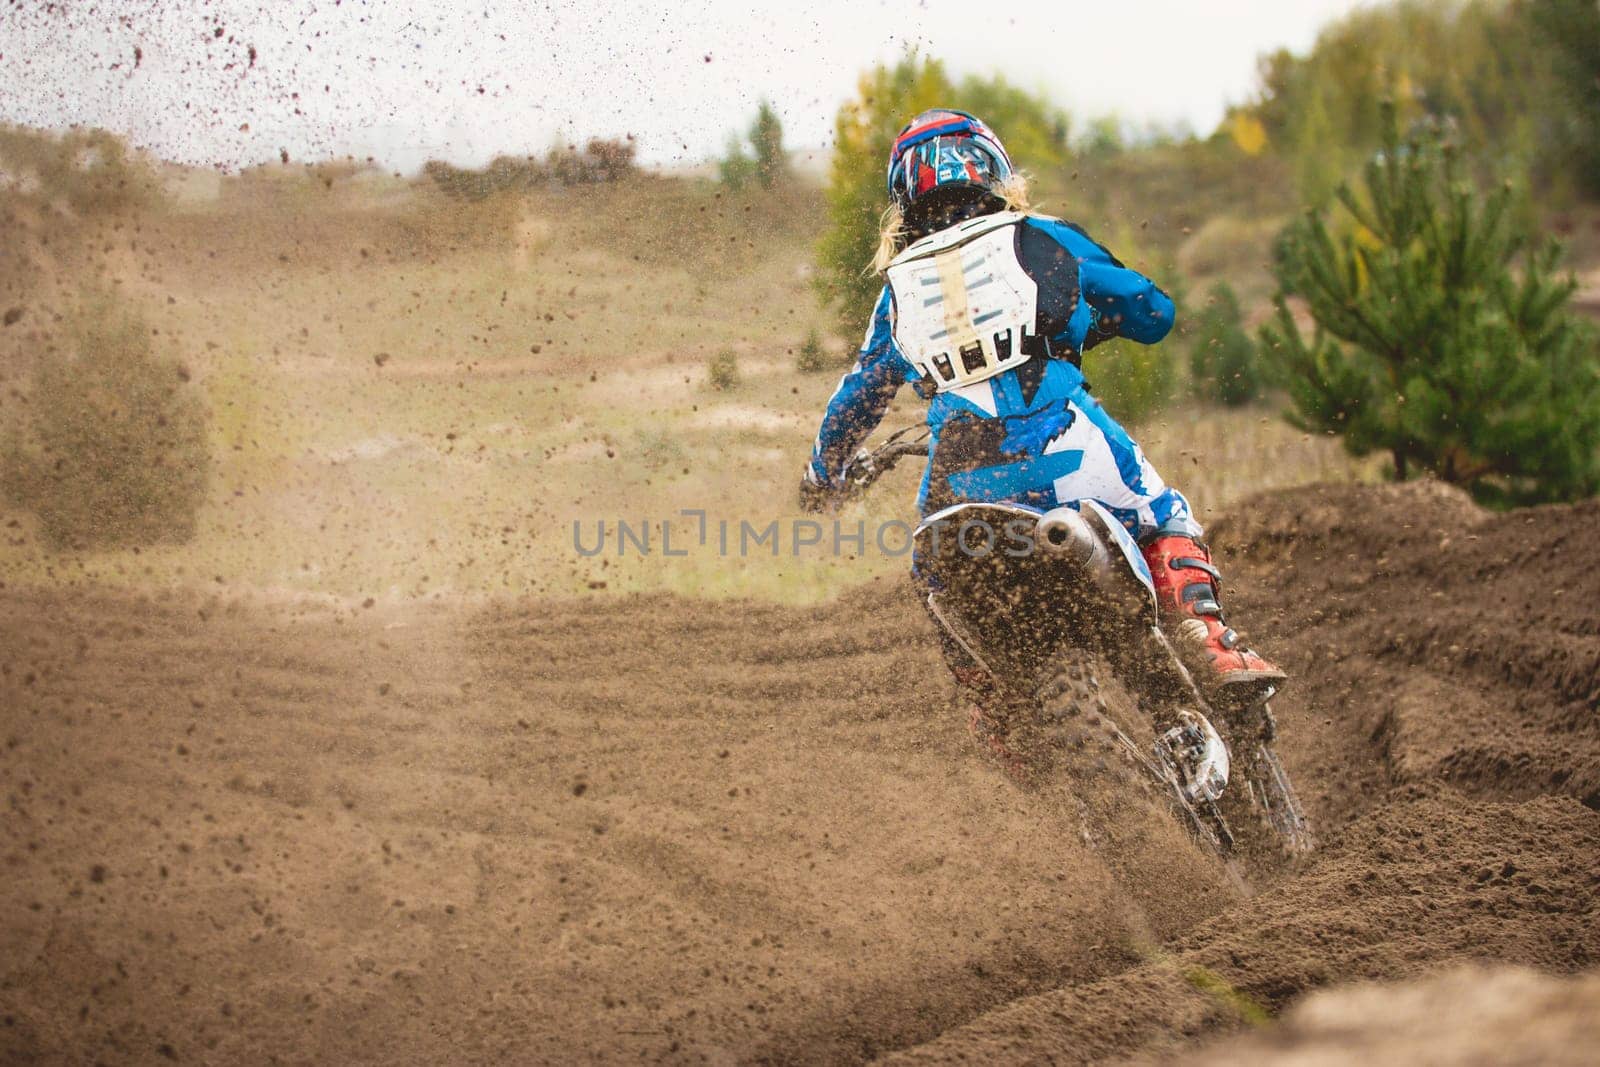 Moto cross - MX girl biker at race in Russia - a sharp turn and the spray of dirt, rear view, telephoto